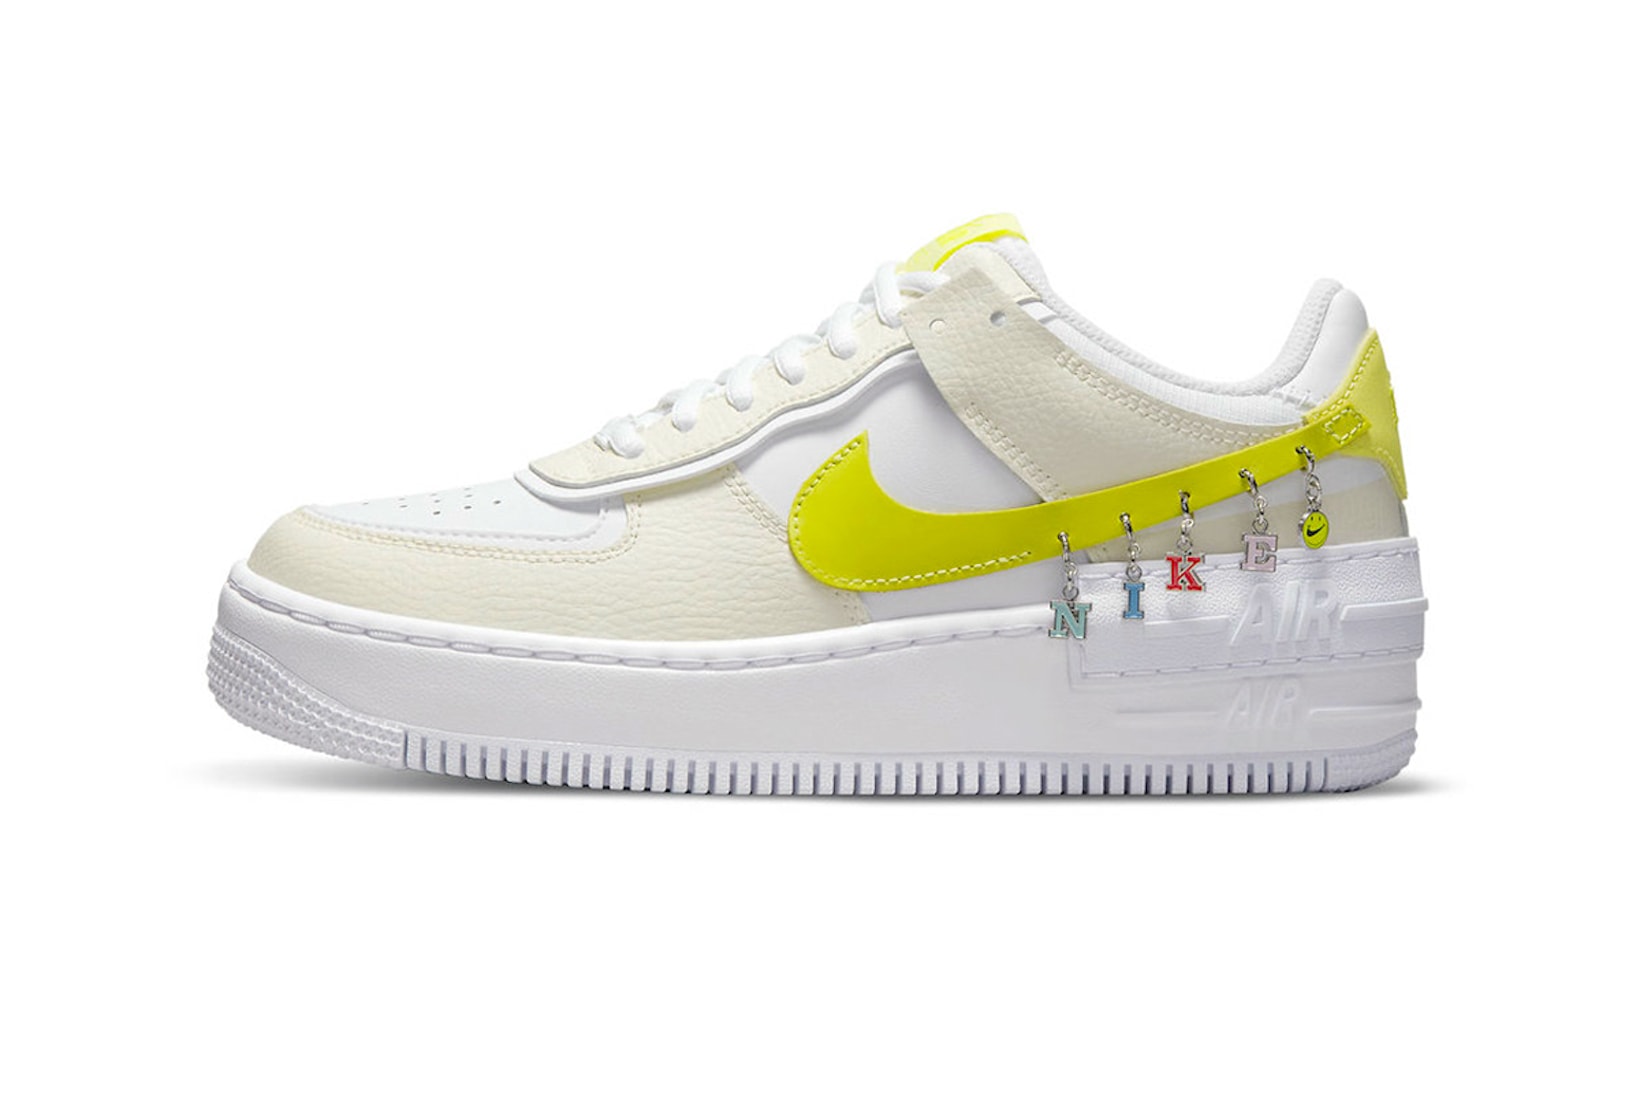 nike air force 1 shadow af1 womens sneakers have a day white yellow anklet charms footwear sneakerhead kicks shoes lateral